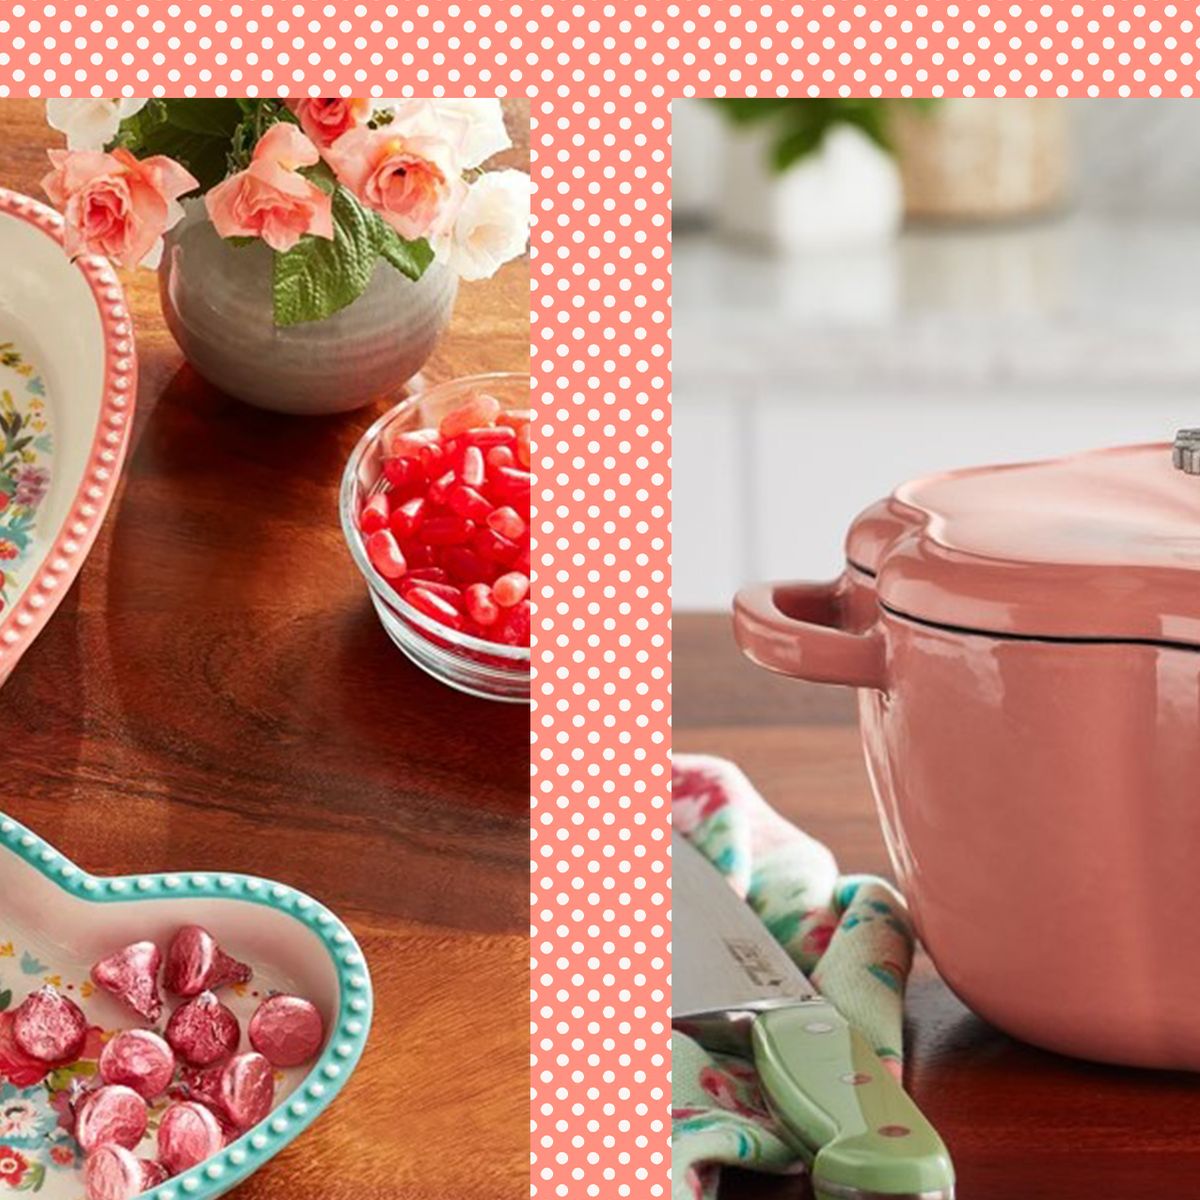 The Pioneer Woman Timeless Beauty Floral Shaped 3-Quart Dutch Oven